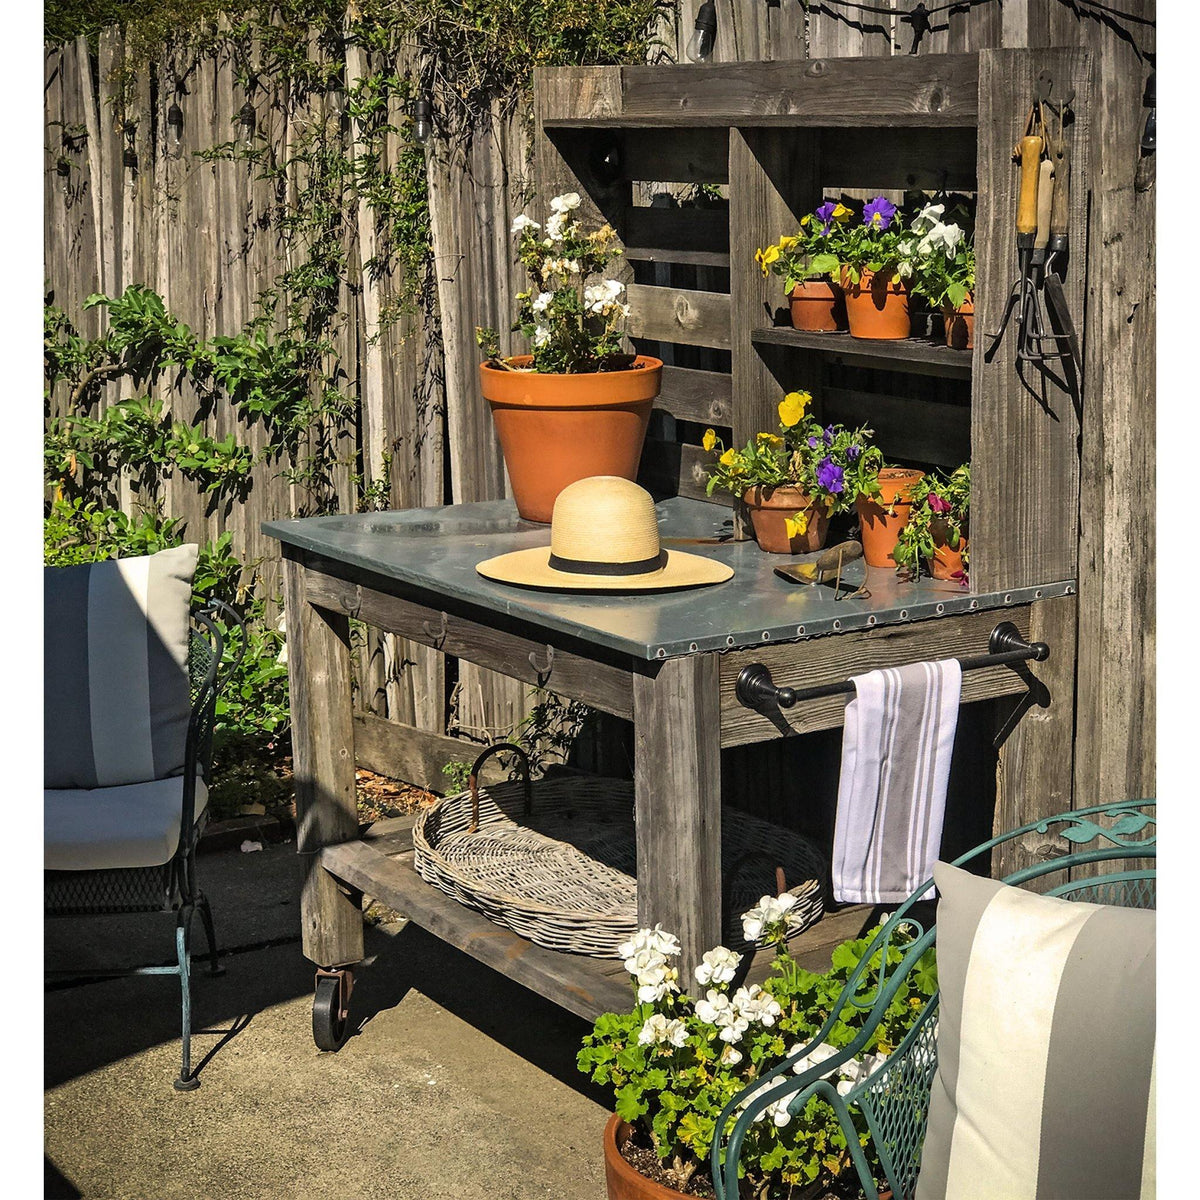 Lee Display's brand new outdoor Redwood Potting Table and Buffet Island sitting outside in the backyard during the springtime.  On sale now at leedisplay.com